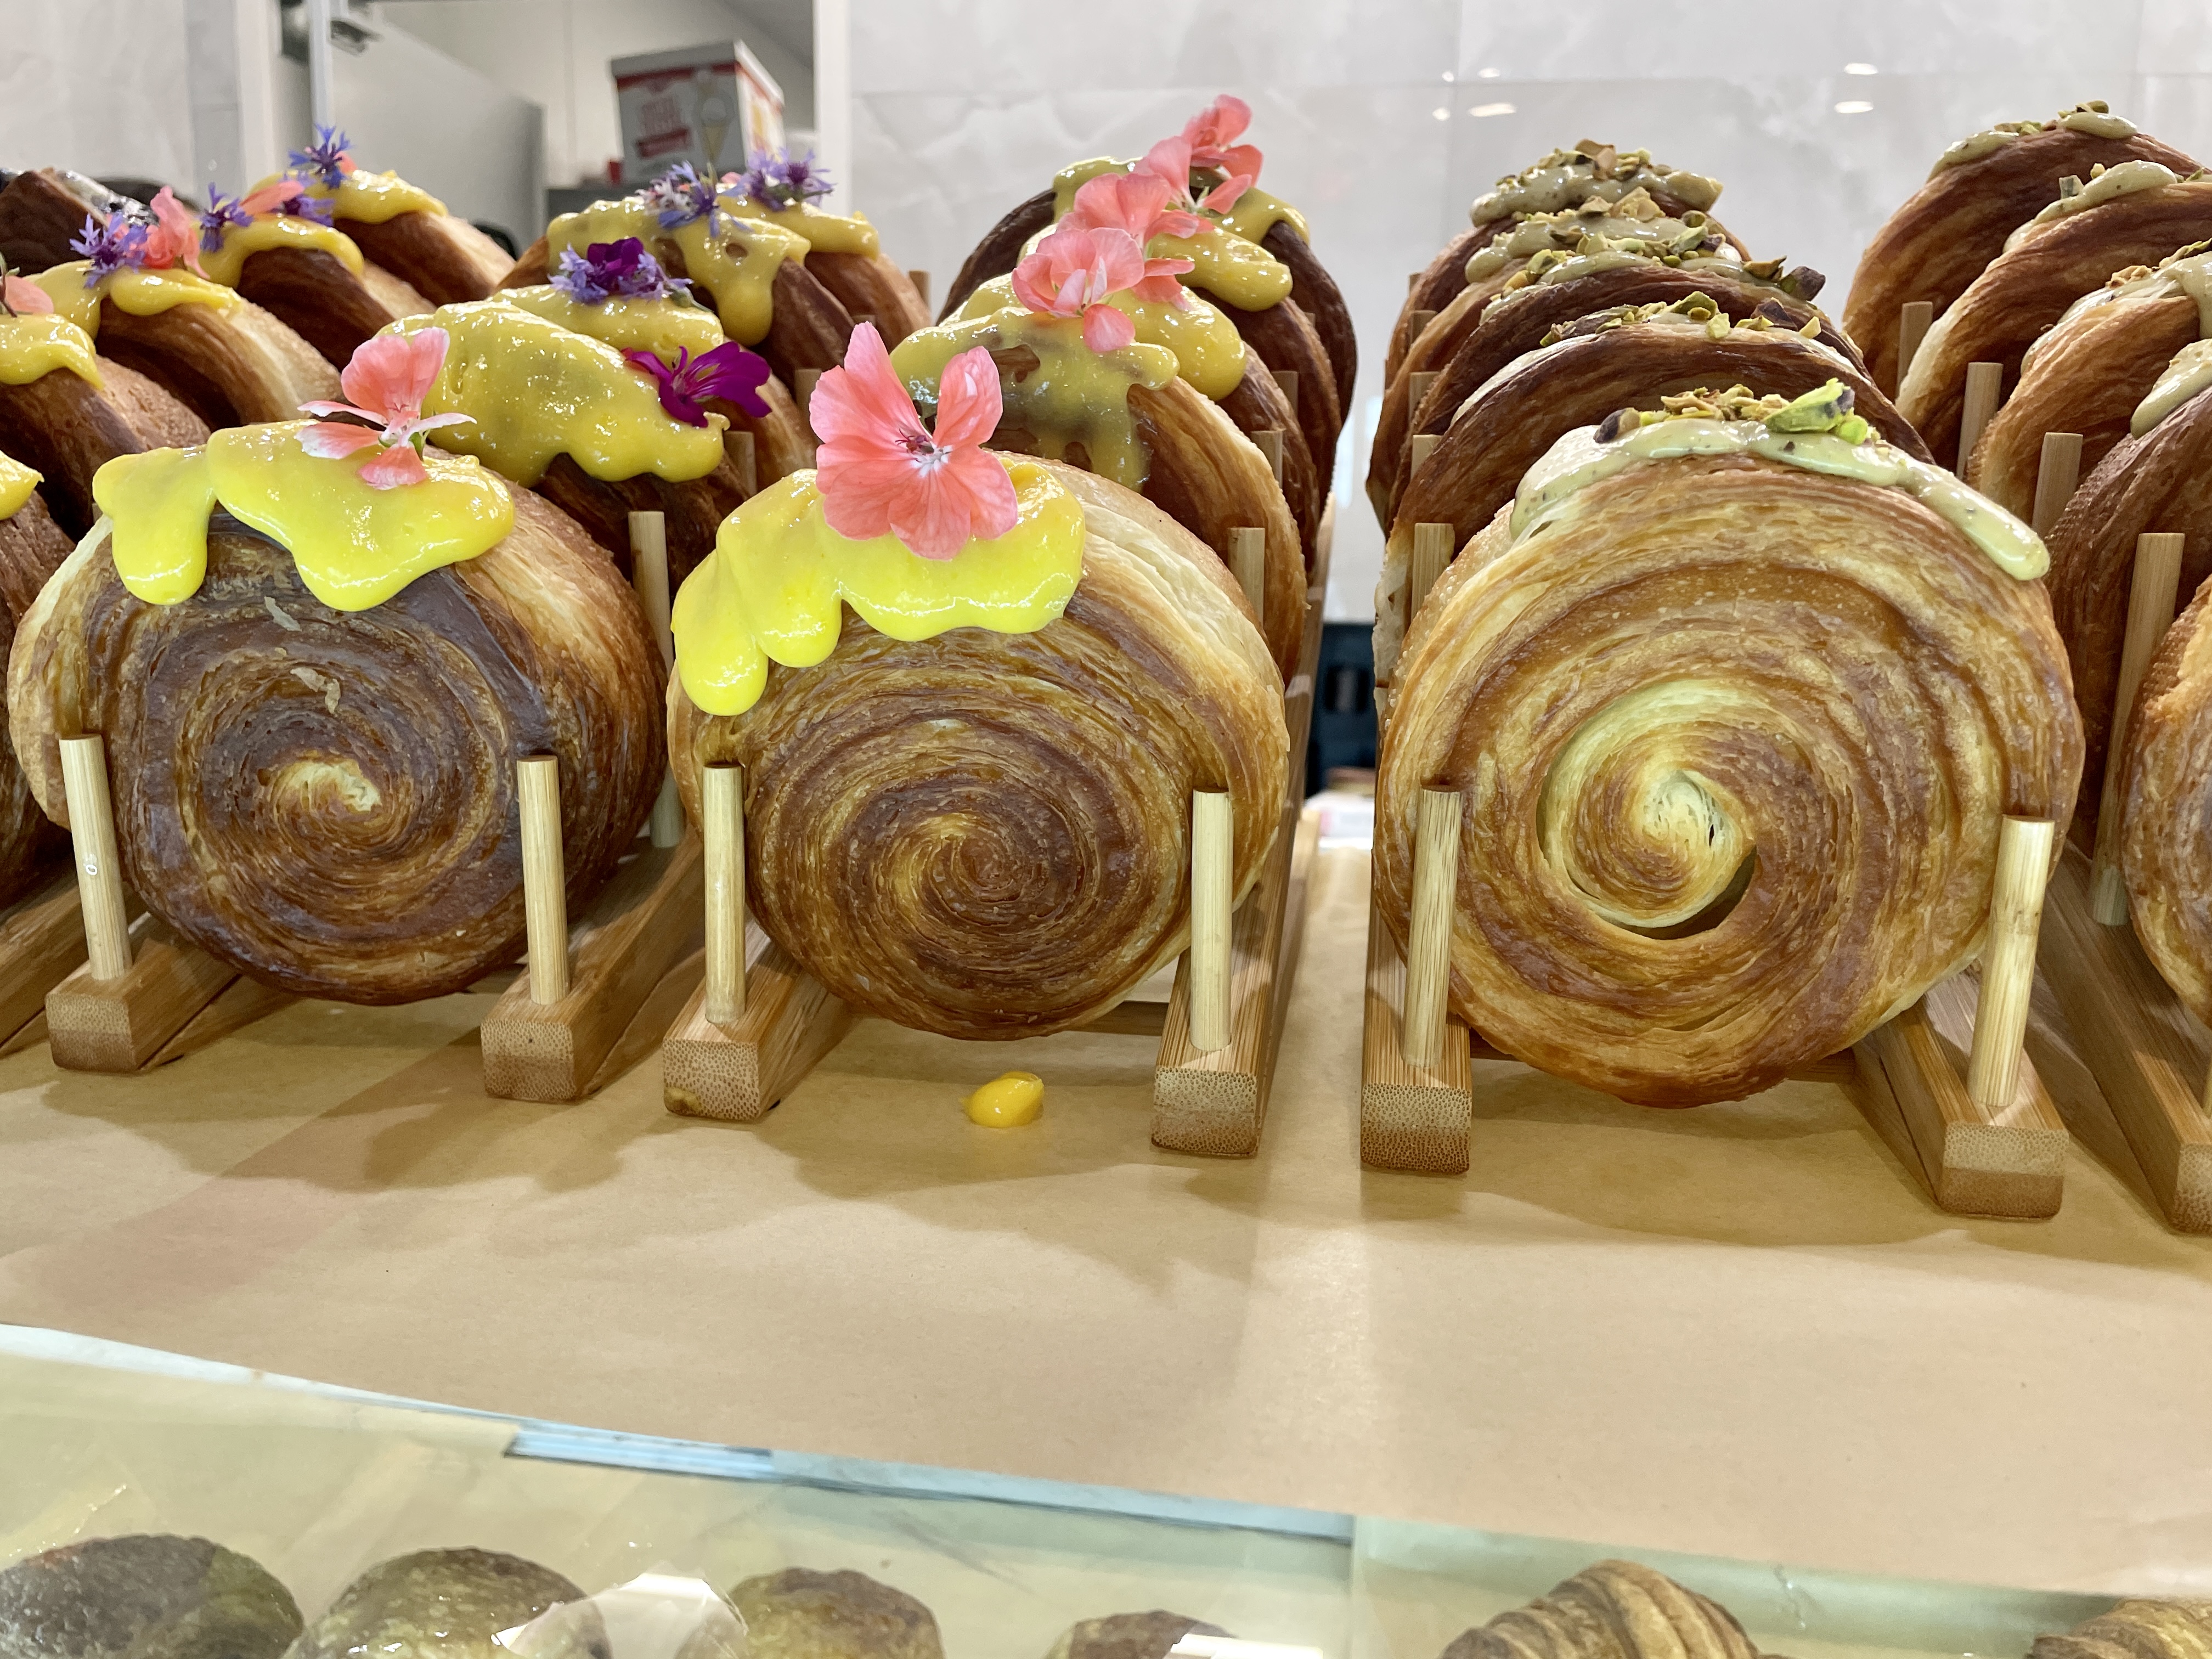 Circle-shaped croissants topped with yellow icing and edible flowers and others with pistachio icing with crushed pistachios sit in wooden holders, facing upright, on a bakery counter.